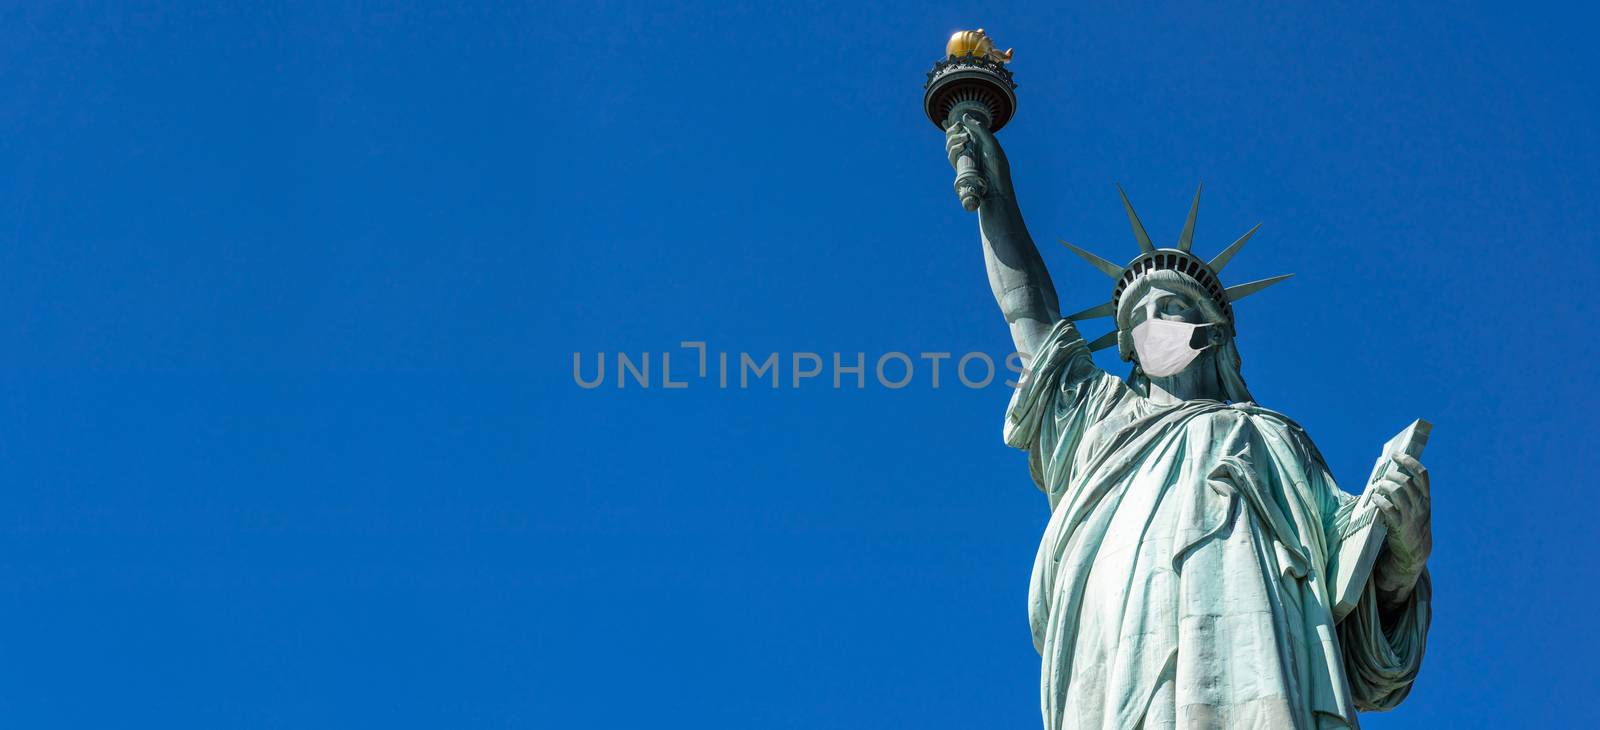 The Statue of Liberty wearing surgical mask when Covid-19 Outbreak over panorama or banner blue color background, New York city, USA,coronavirus pandemic,Architecture and building with tourist concept